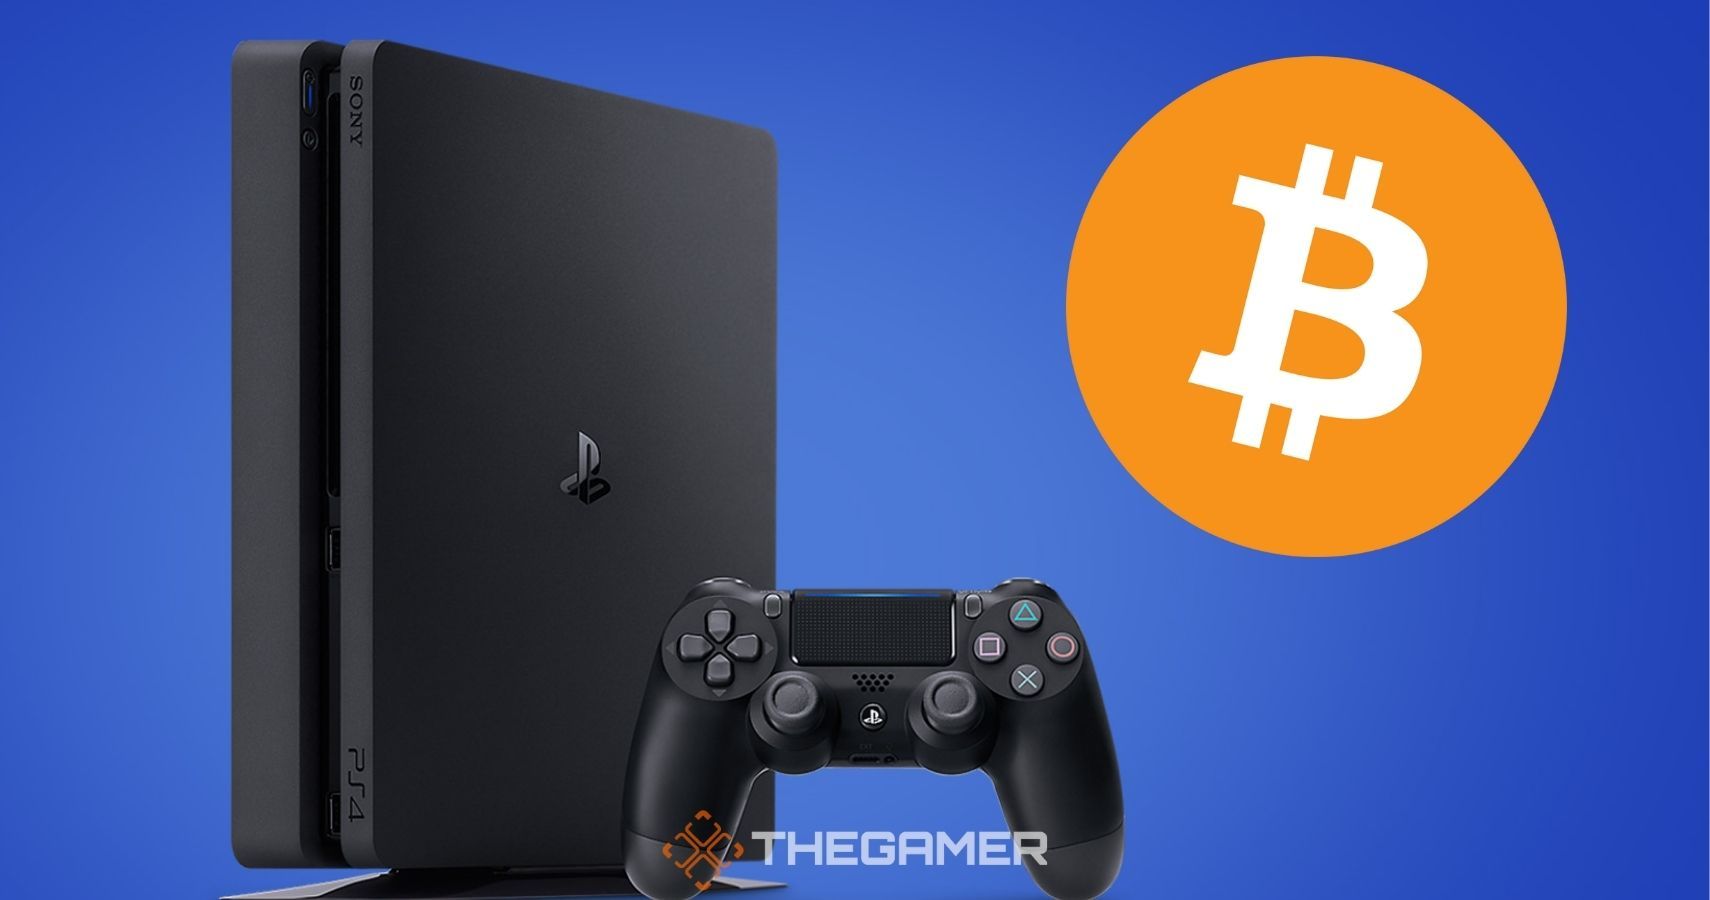 a black ps4 console on a blue background. there's a bitcoin logo next to it, which is an orange circle with a B in the middle.